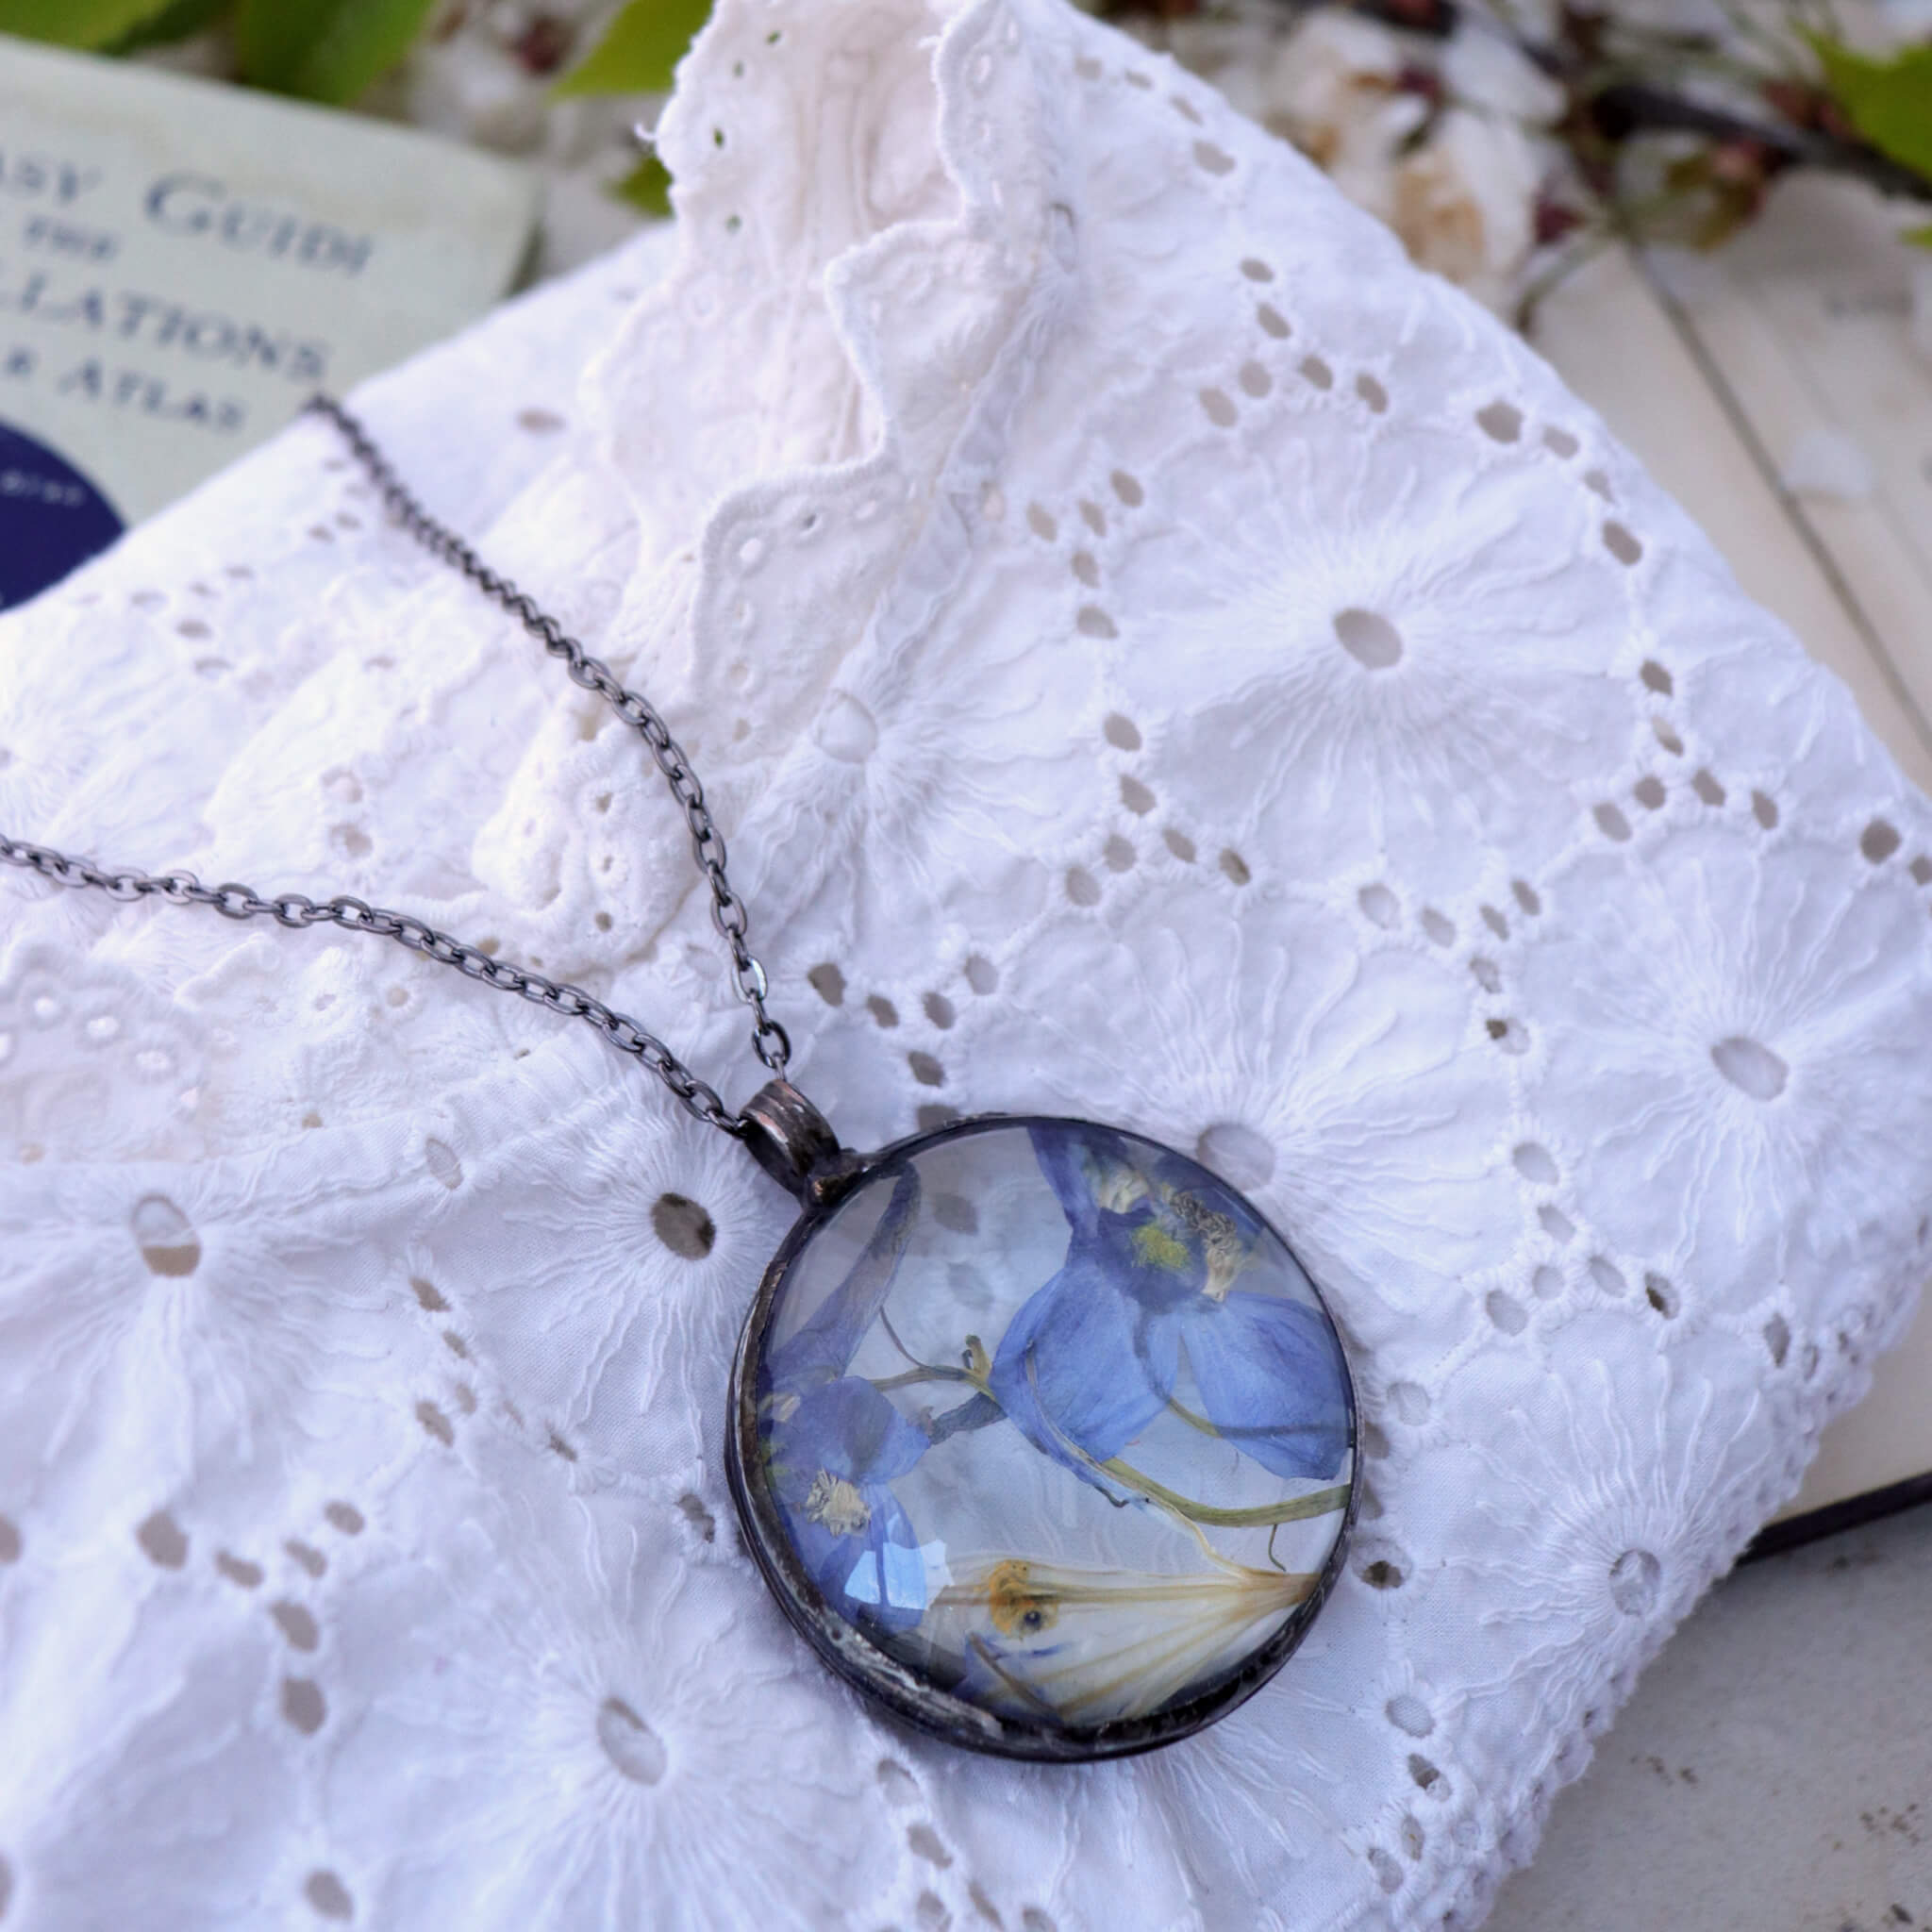 Blue pressed flower in a large round glass soldered necklace lying on a white blouse